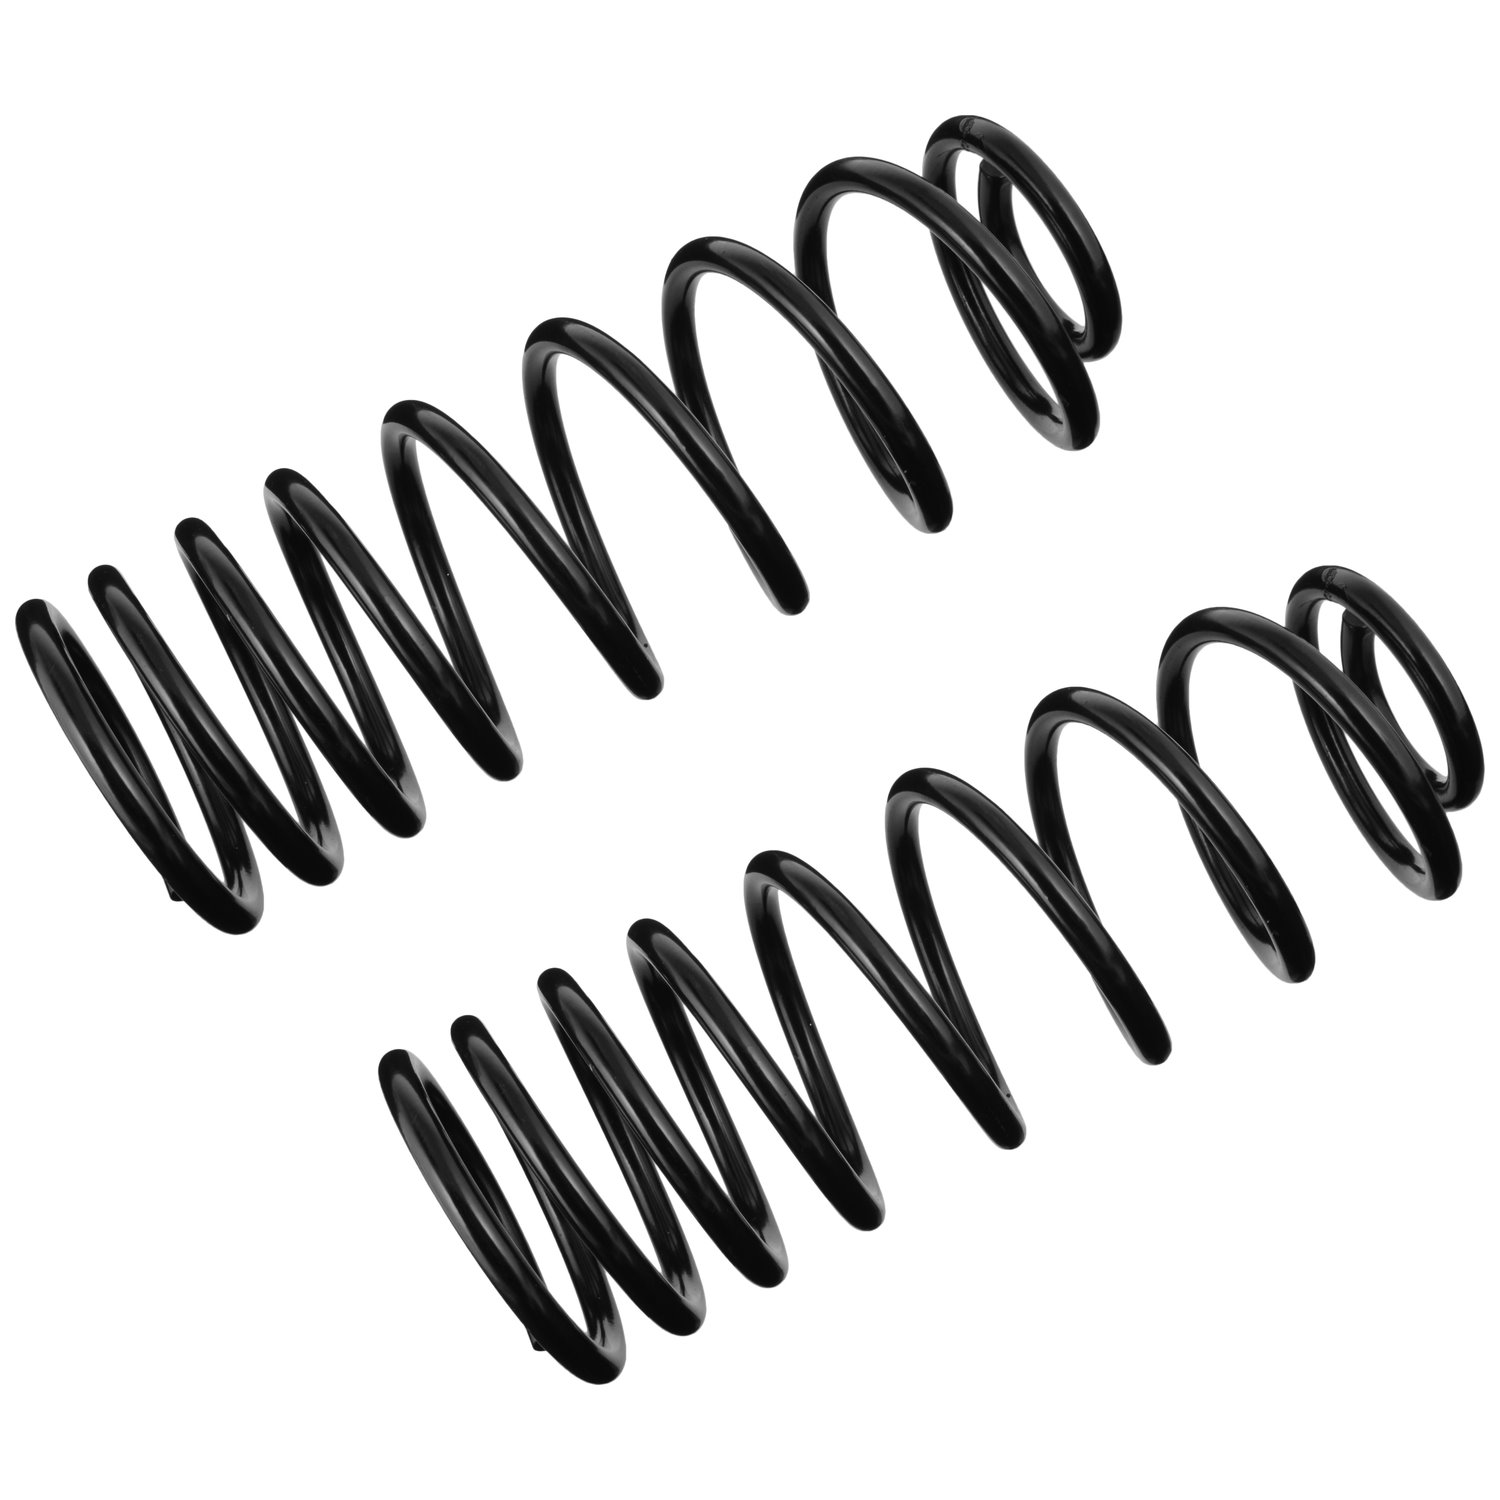 JCS1635T Coil Spring Set Fits Select Chevrolet Models, Variable-Rate, Position: Left/Driver or Right/Passenger